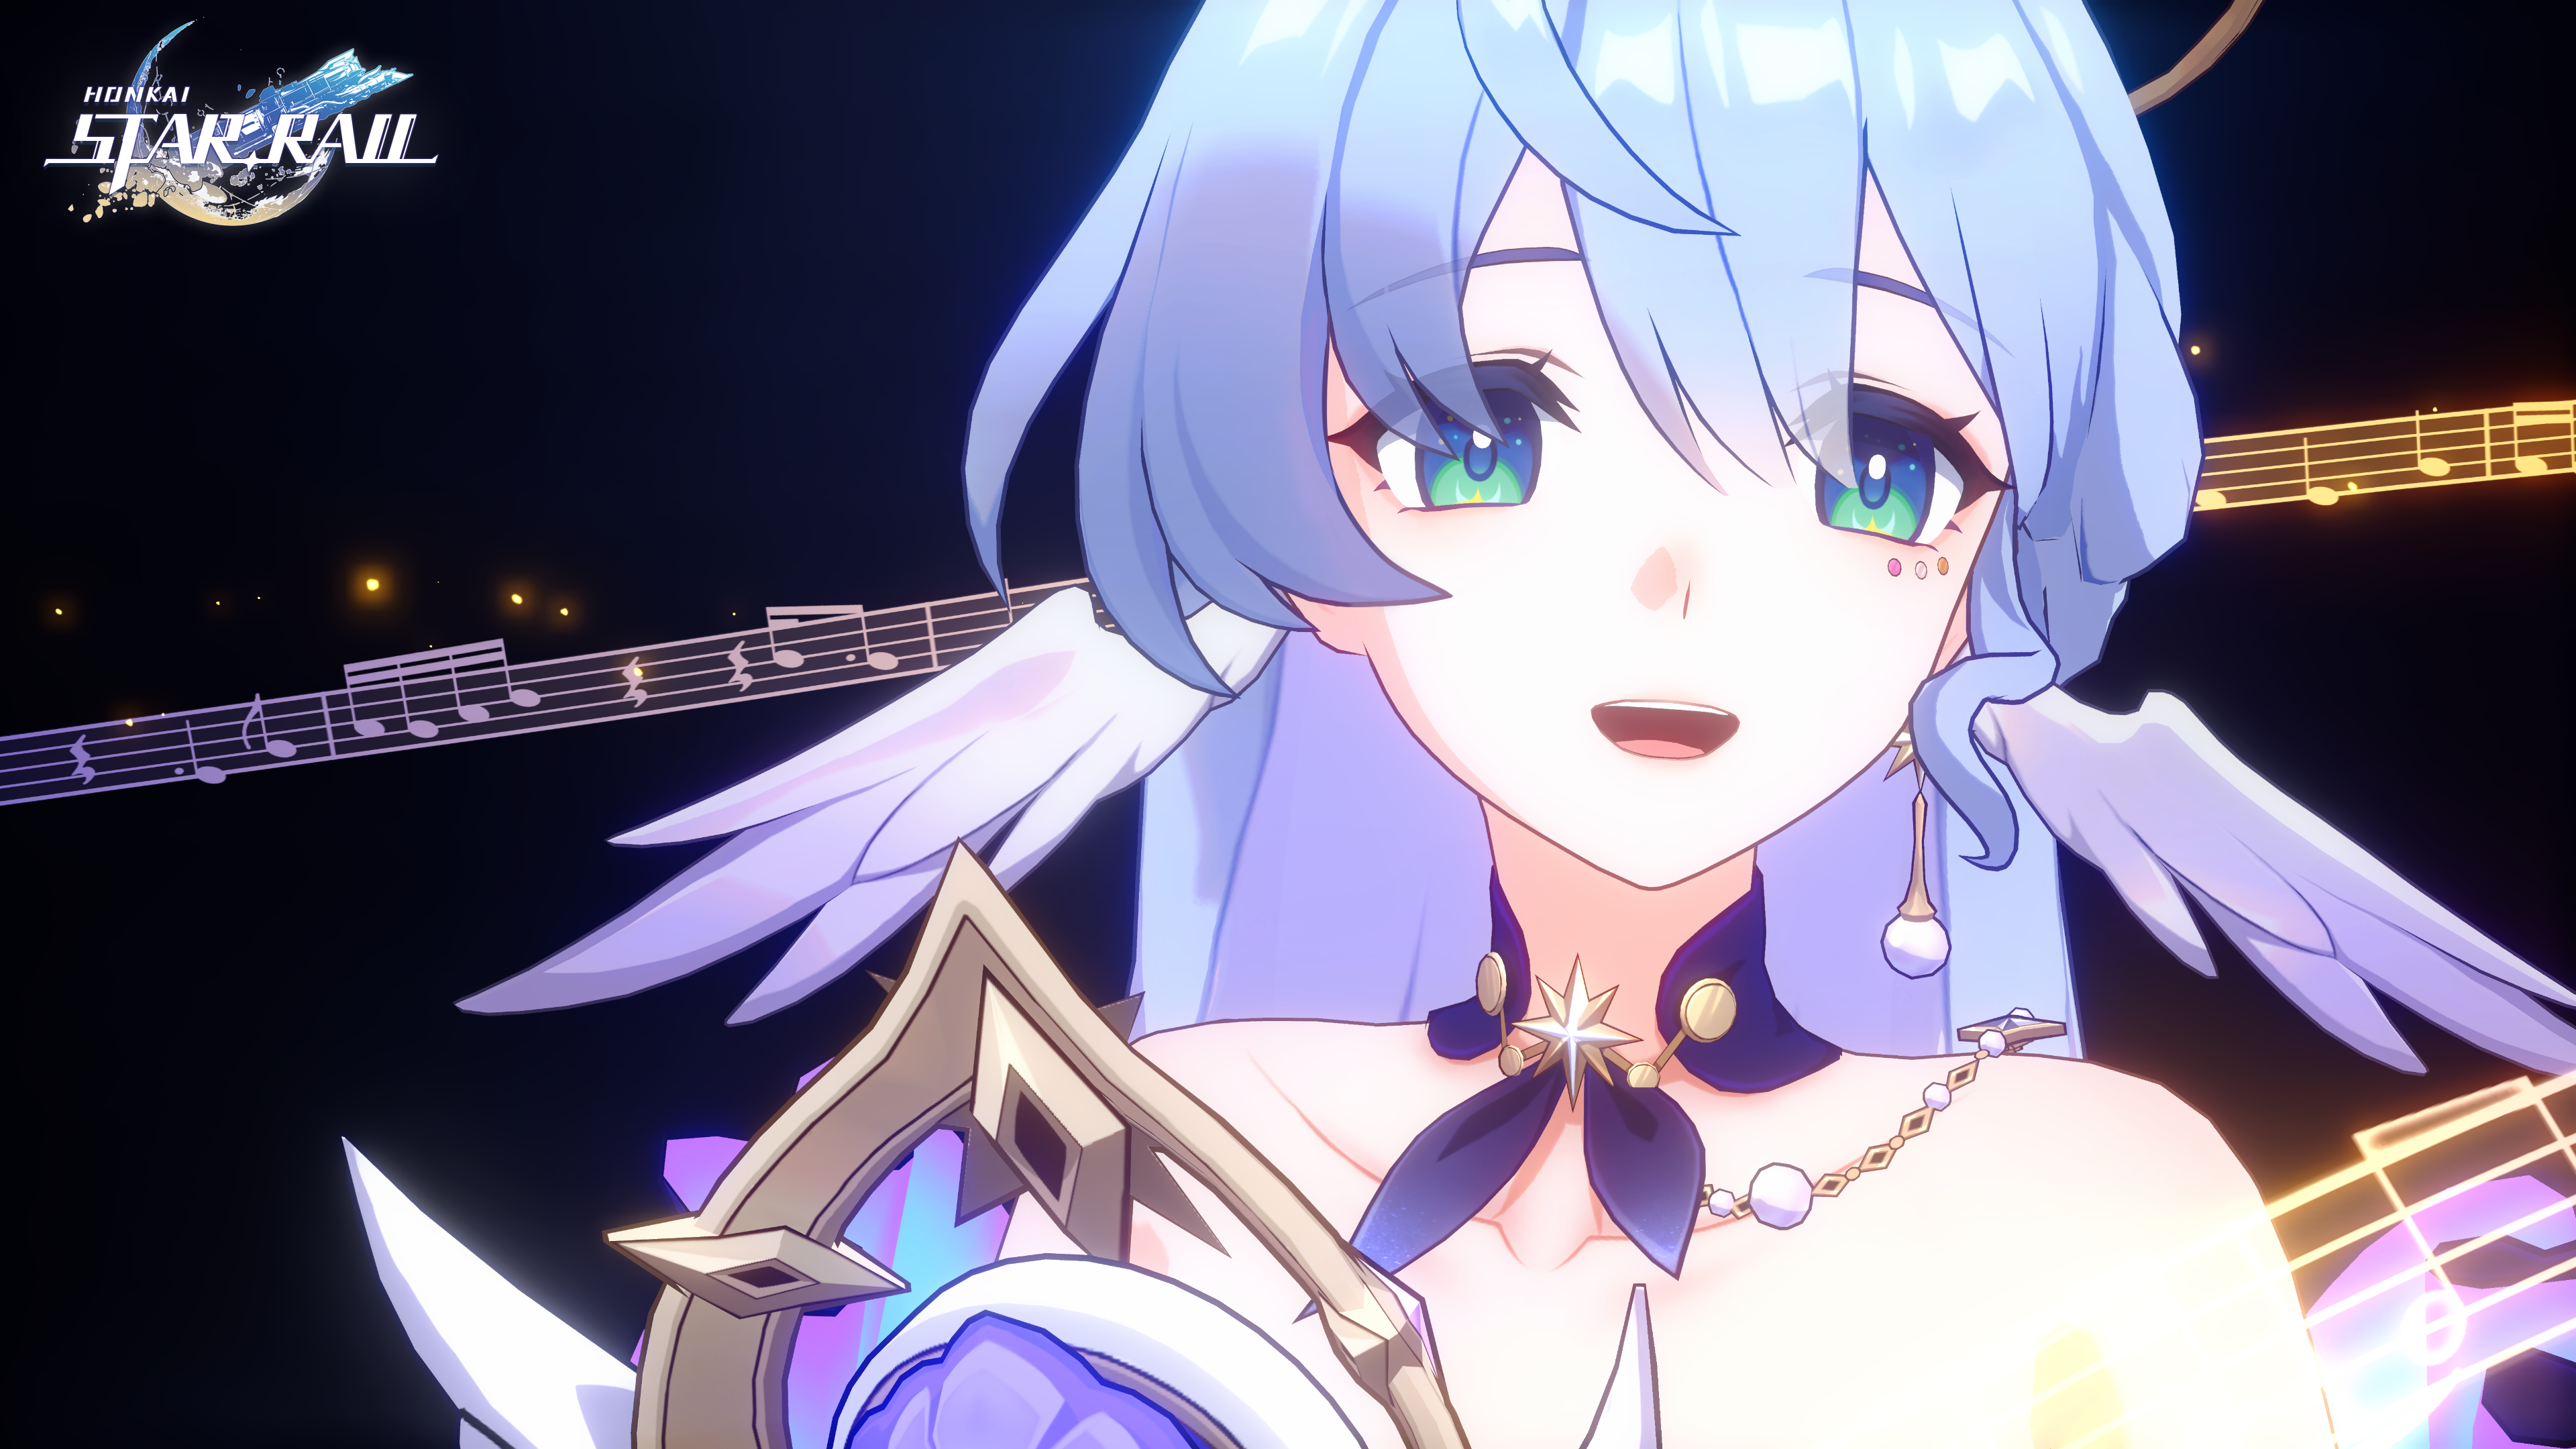 Honkai: Star Rail version 2.2 adds Robin, Boothill, and the Pecacony story climax on May 8